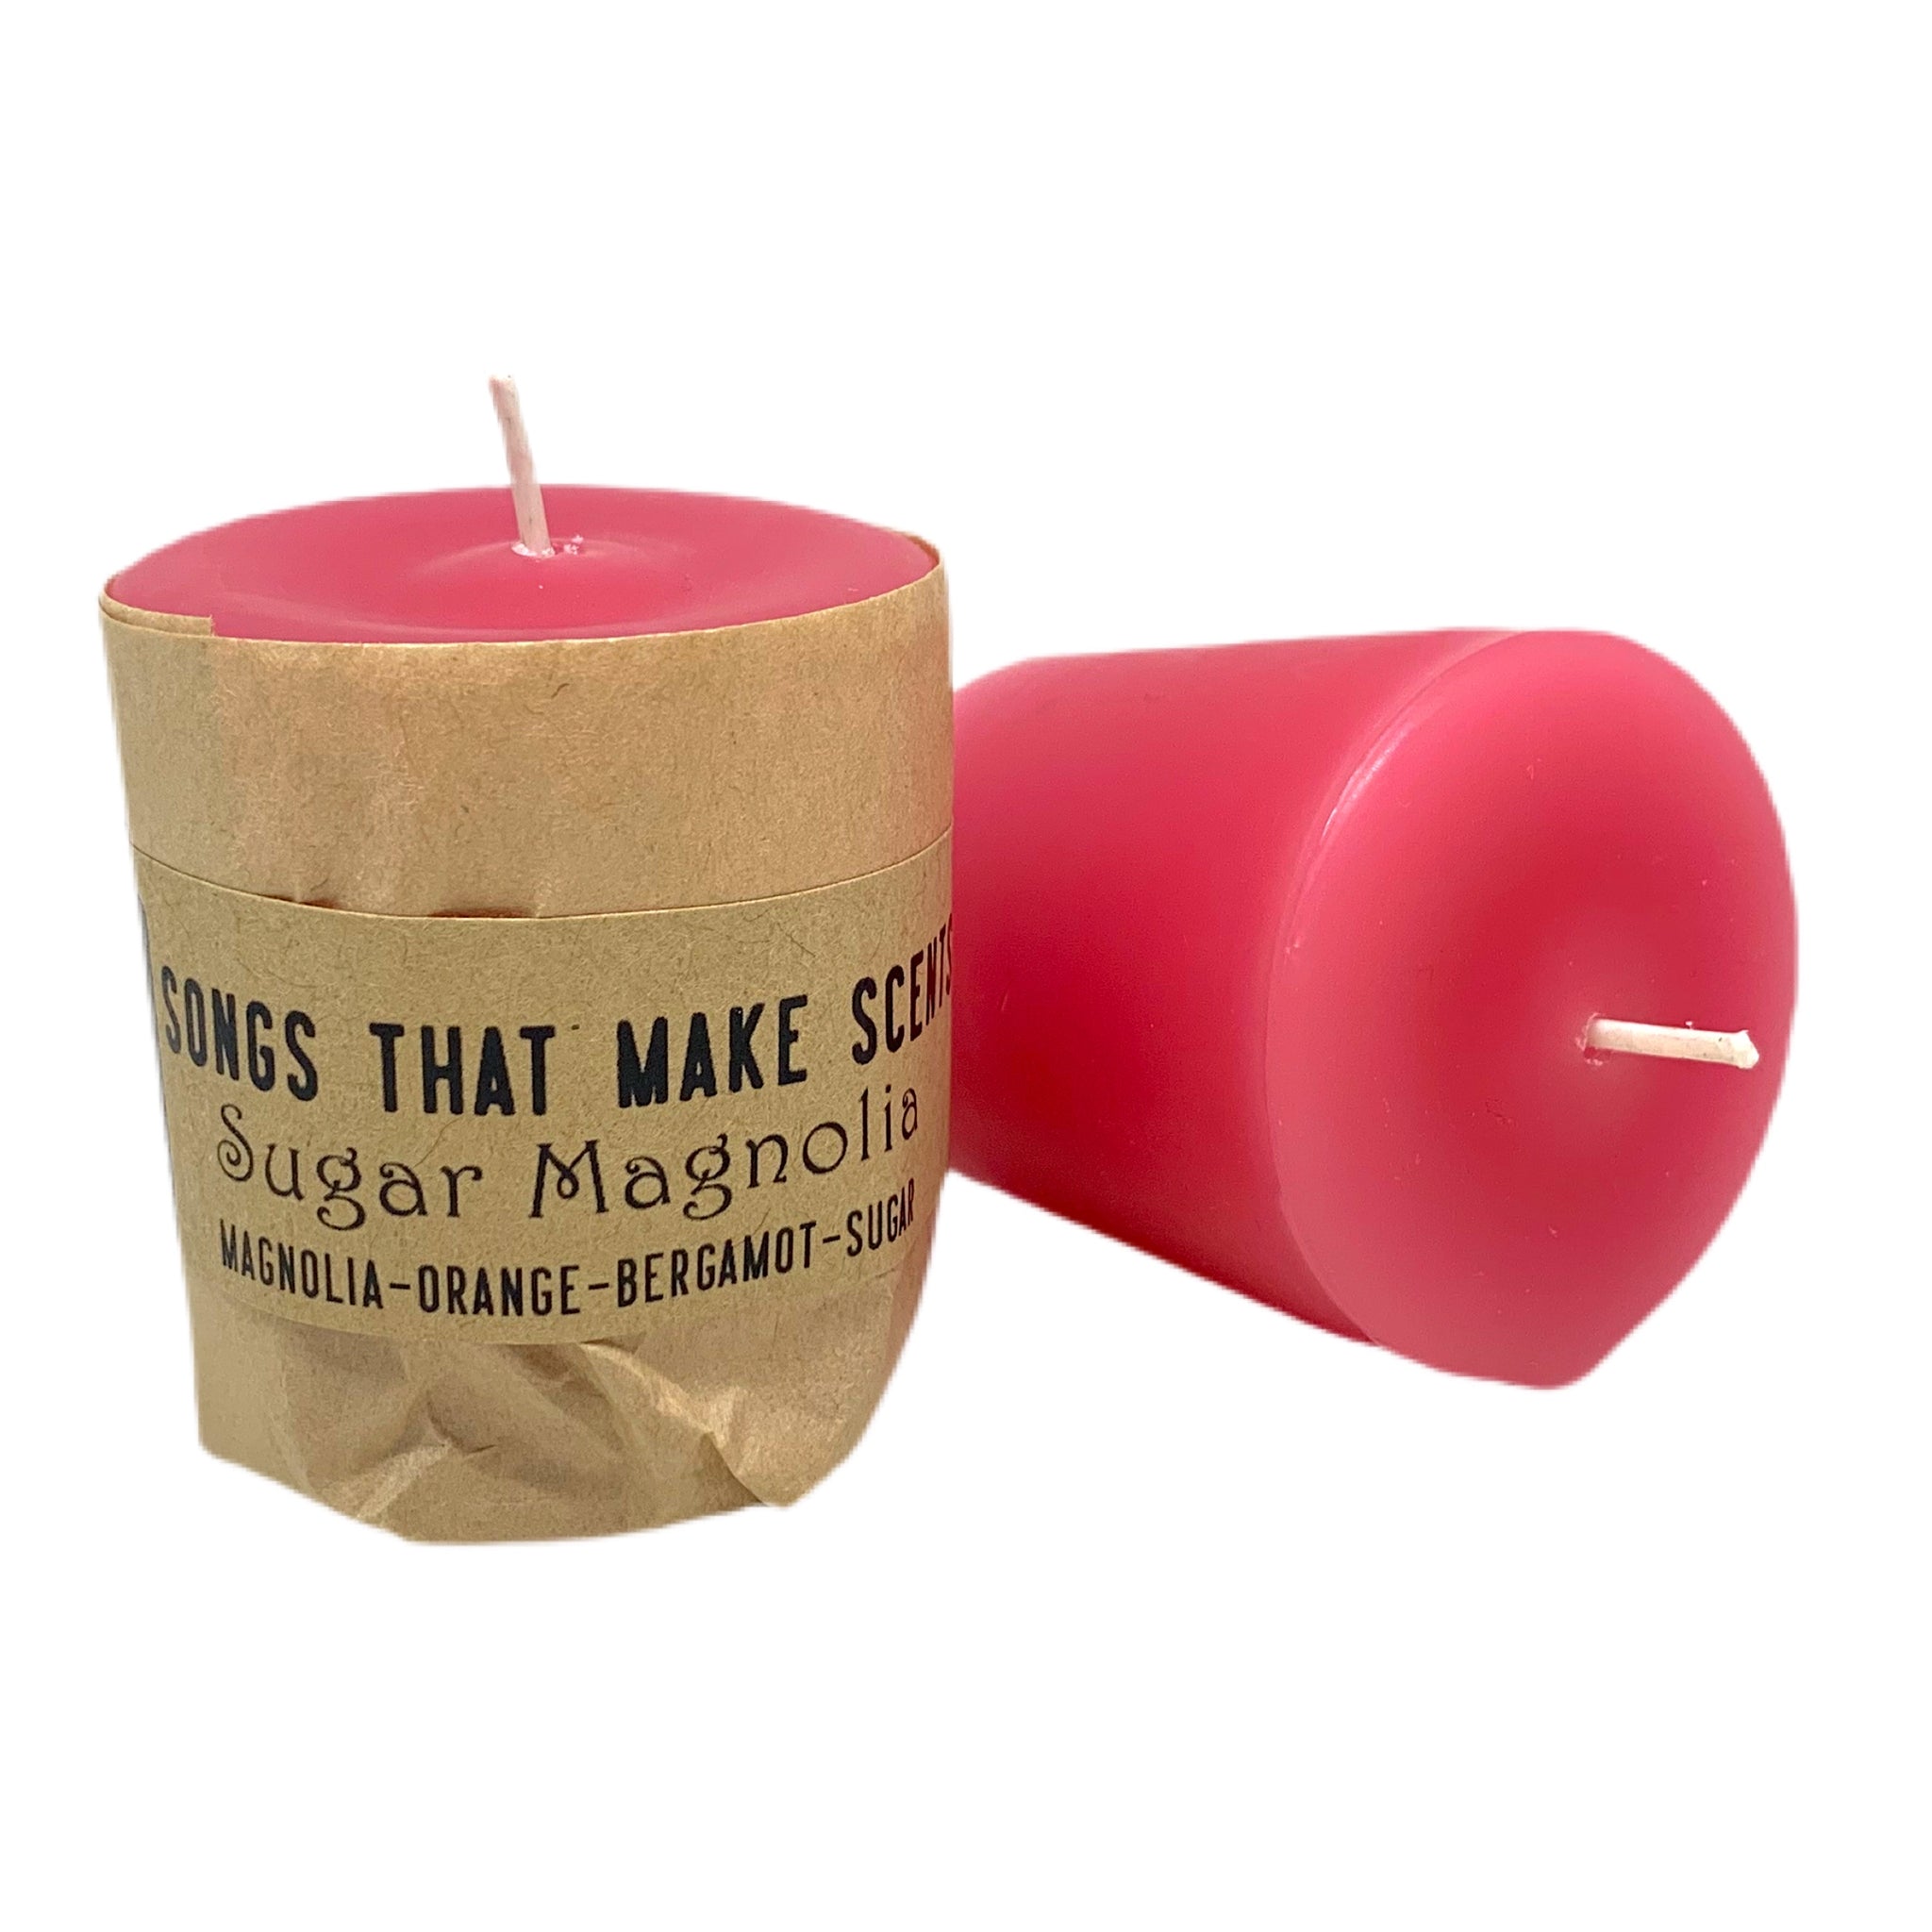 Sugar Magnolia Scented Votive Candles by Songs That Make Scents